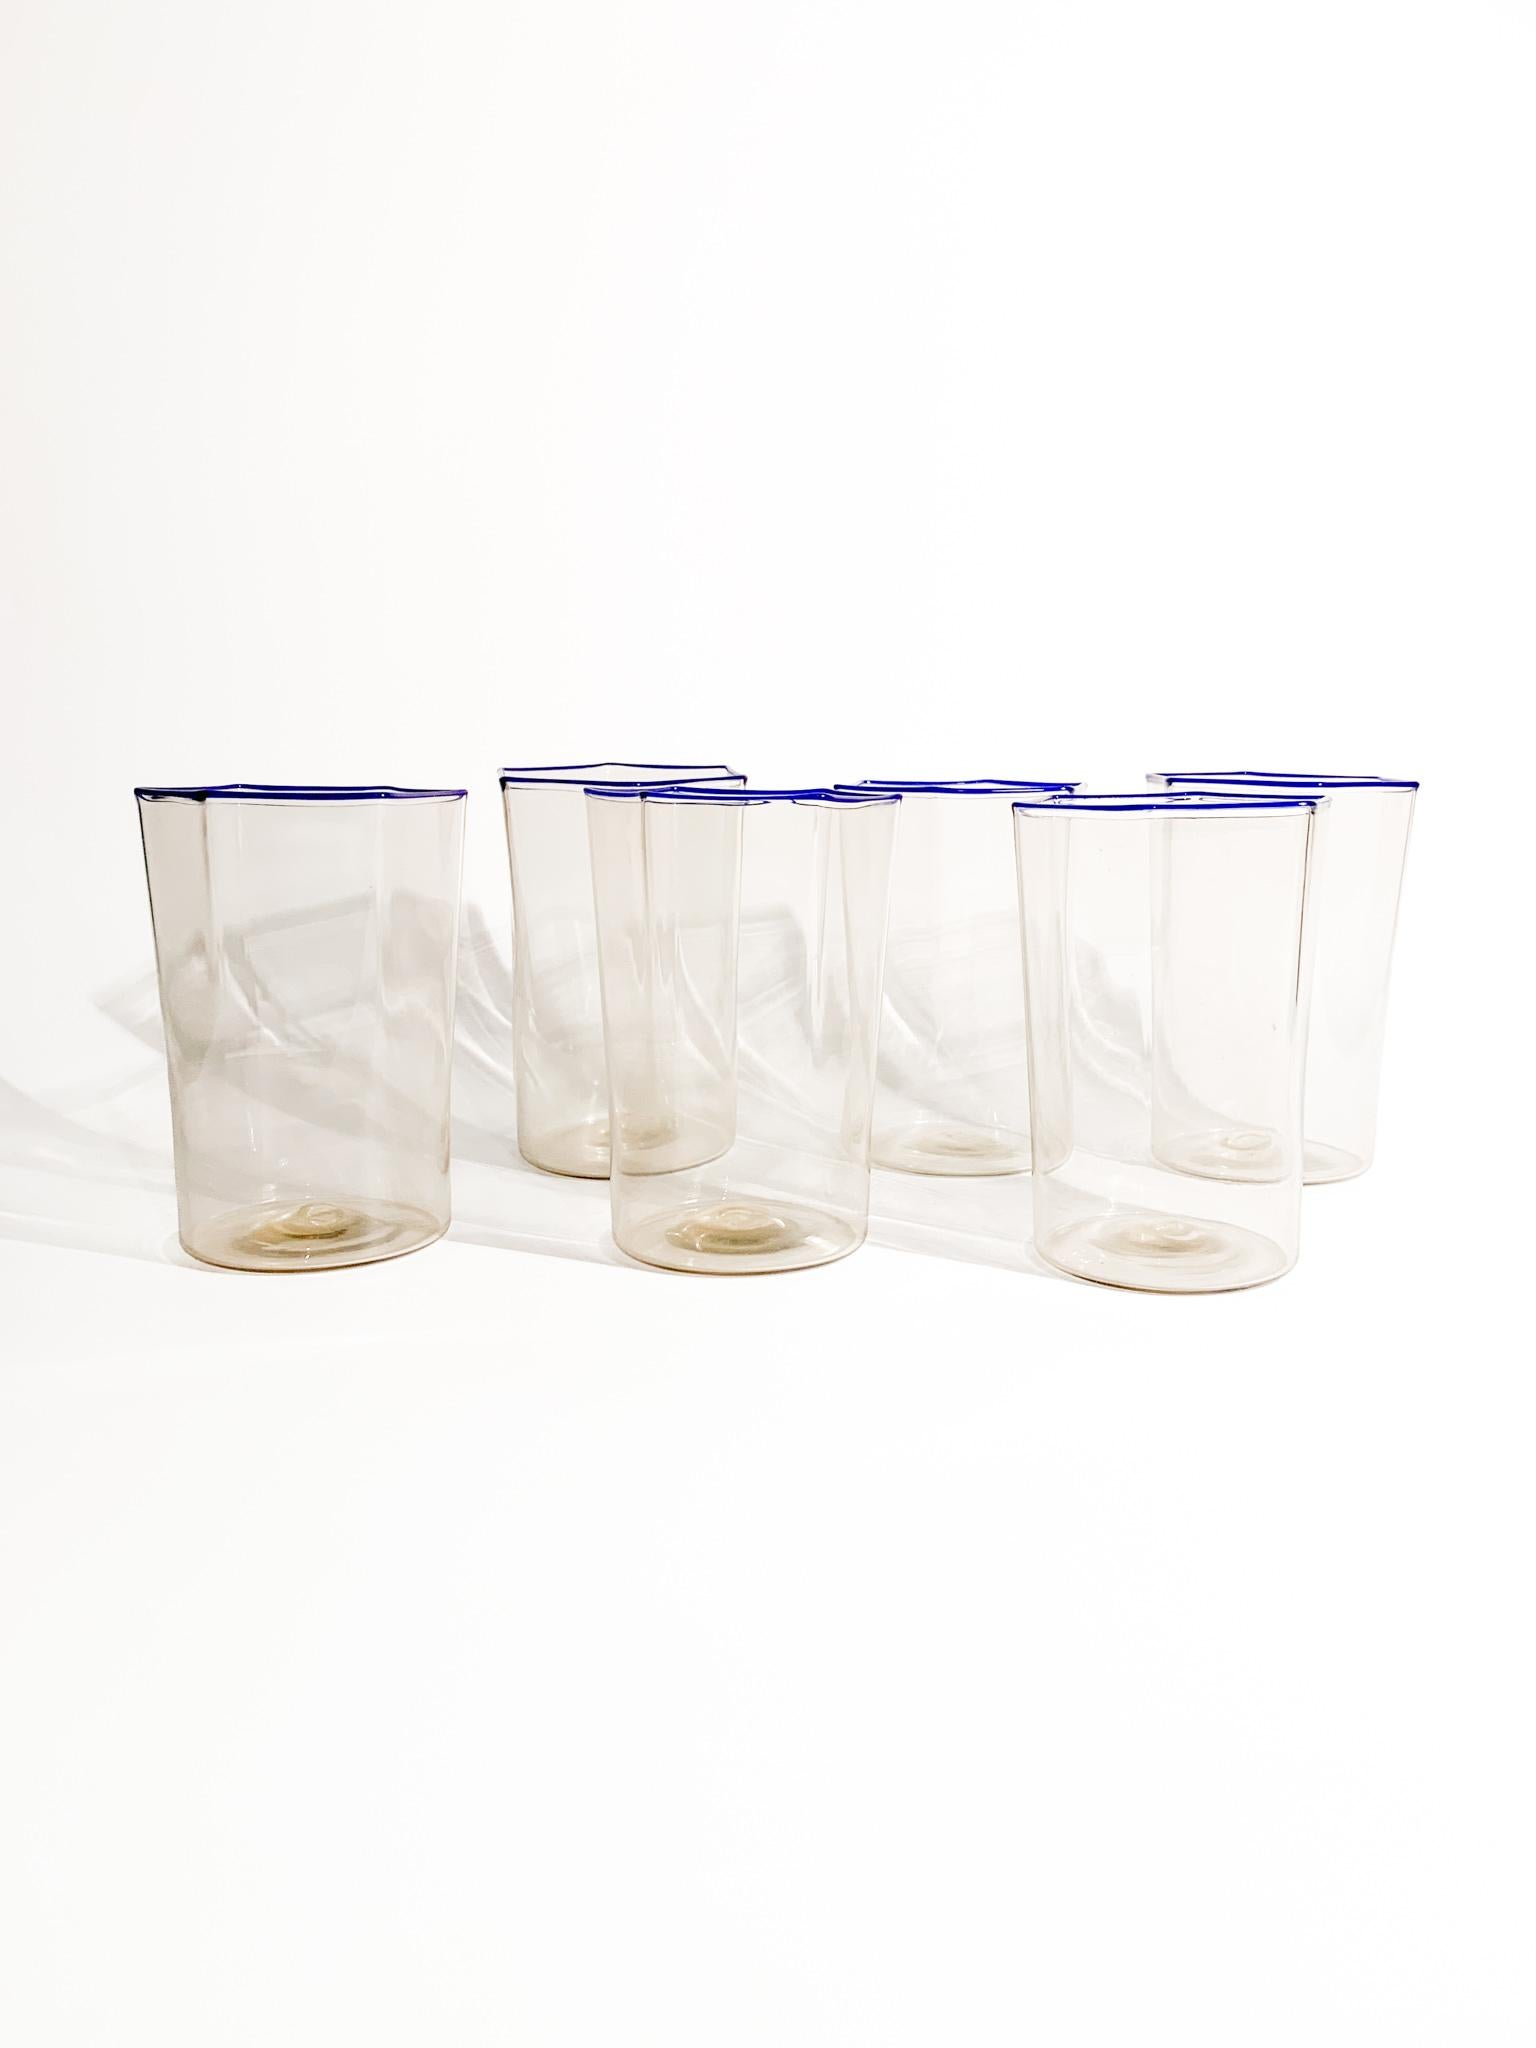 Set of 6 hexagonal glasses in smoky blown Murano glass with blue rim, made by Carlo Scarpa for Venini in the 1930s

Ø cm 8 h cm 11,5

Carlo Scarpa (2 June 1906 – 28 November 1978) was an Italian architect and designer considered one of the most